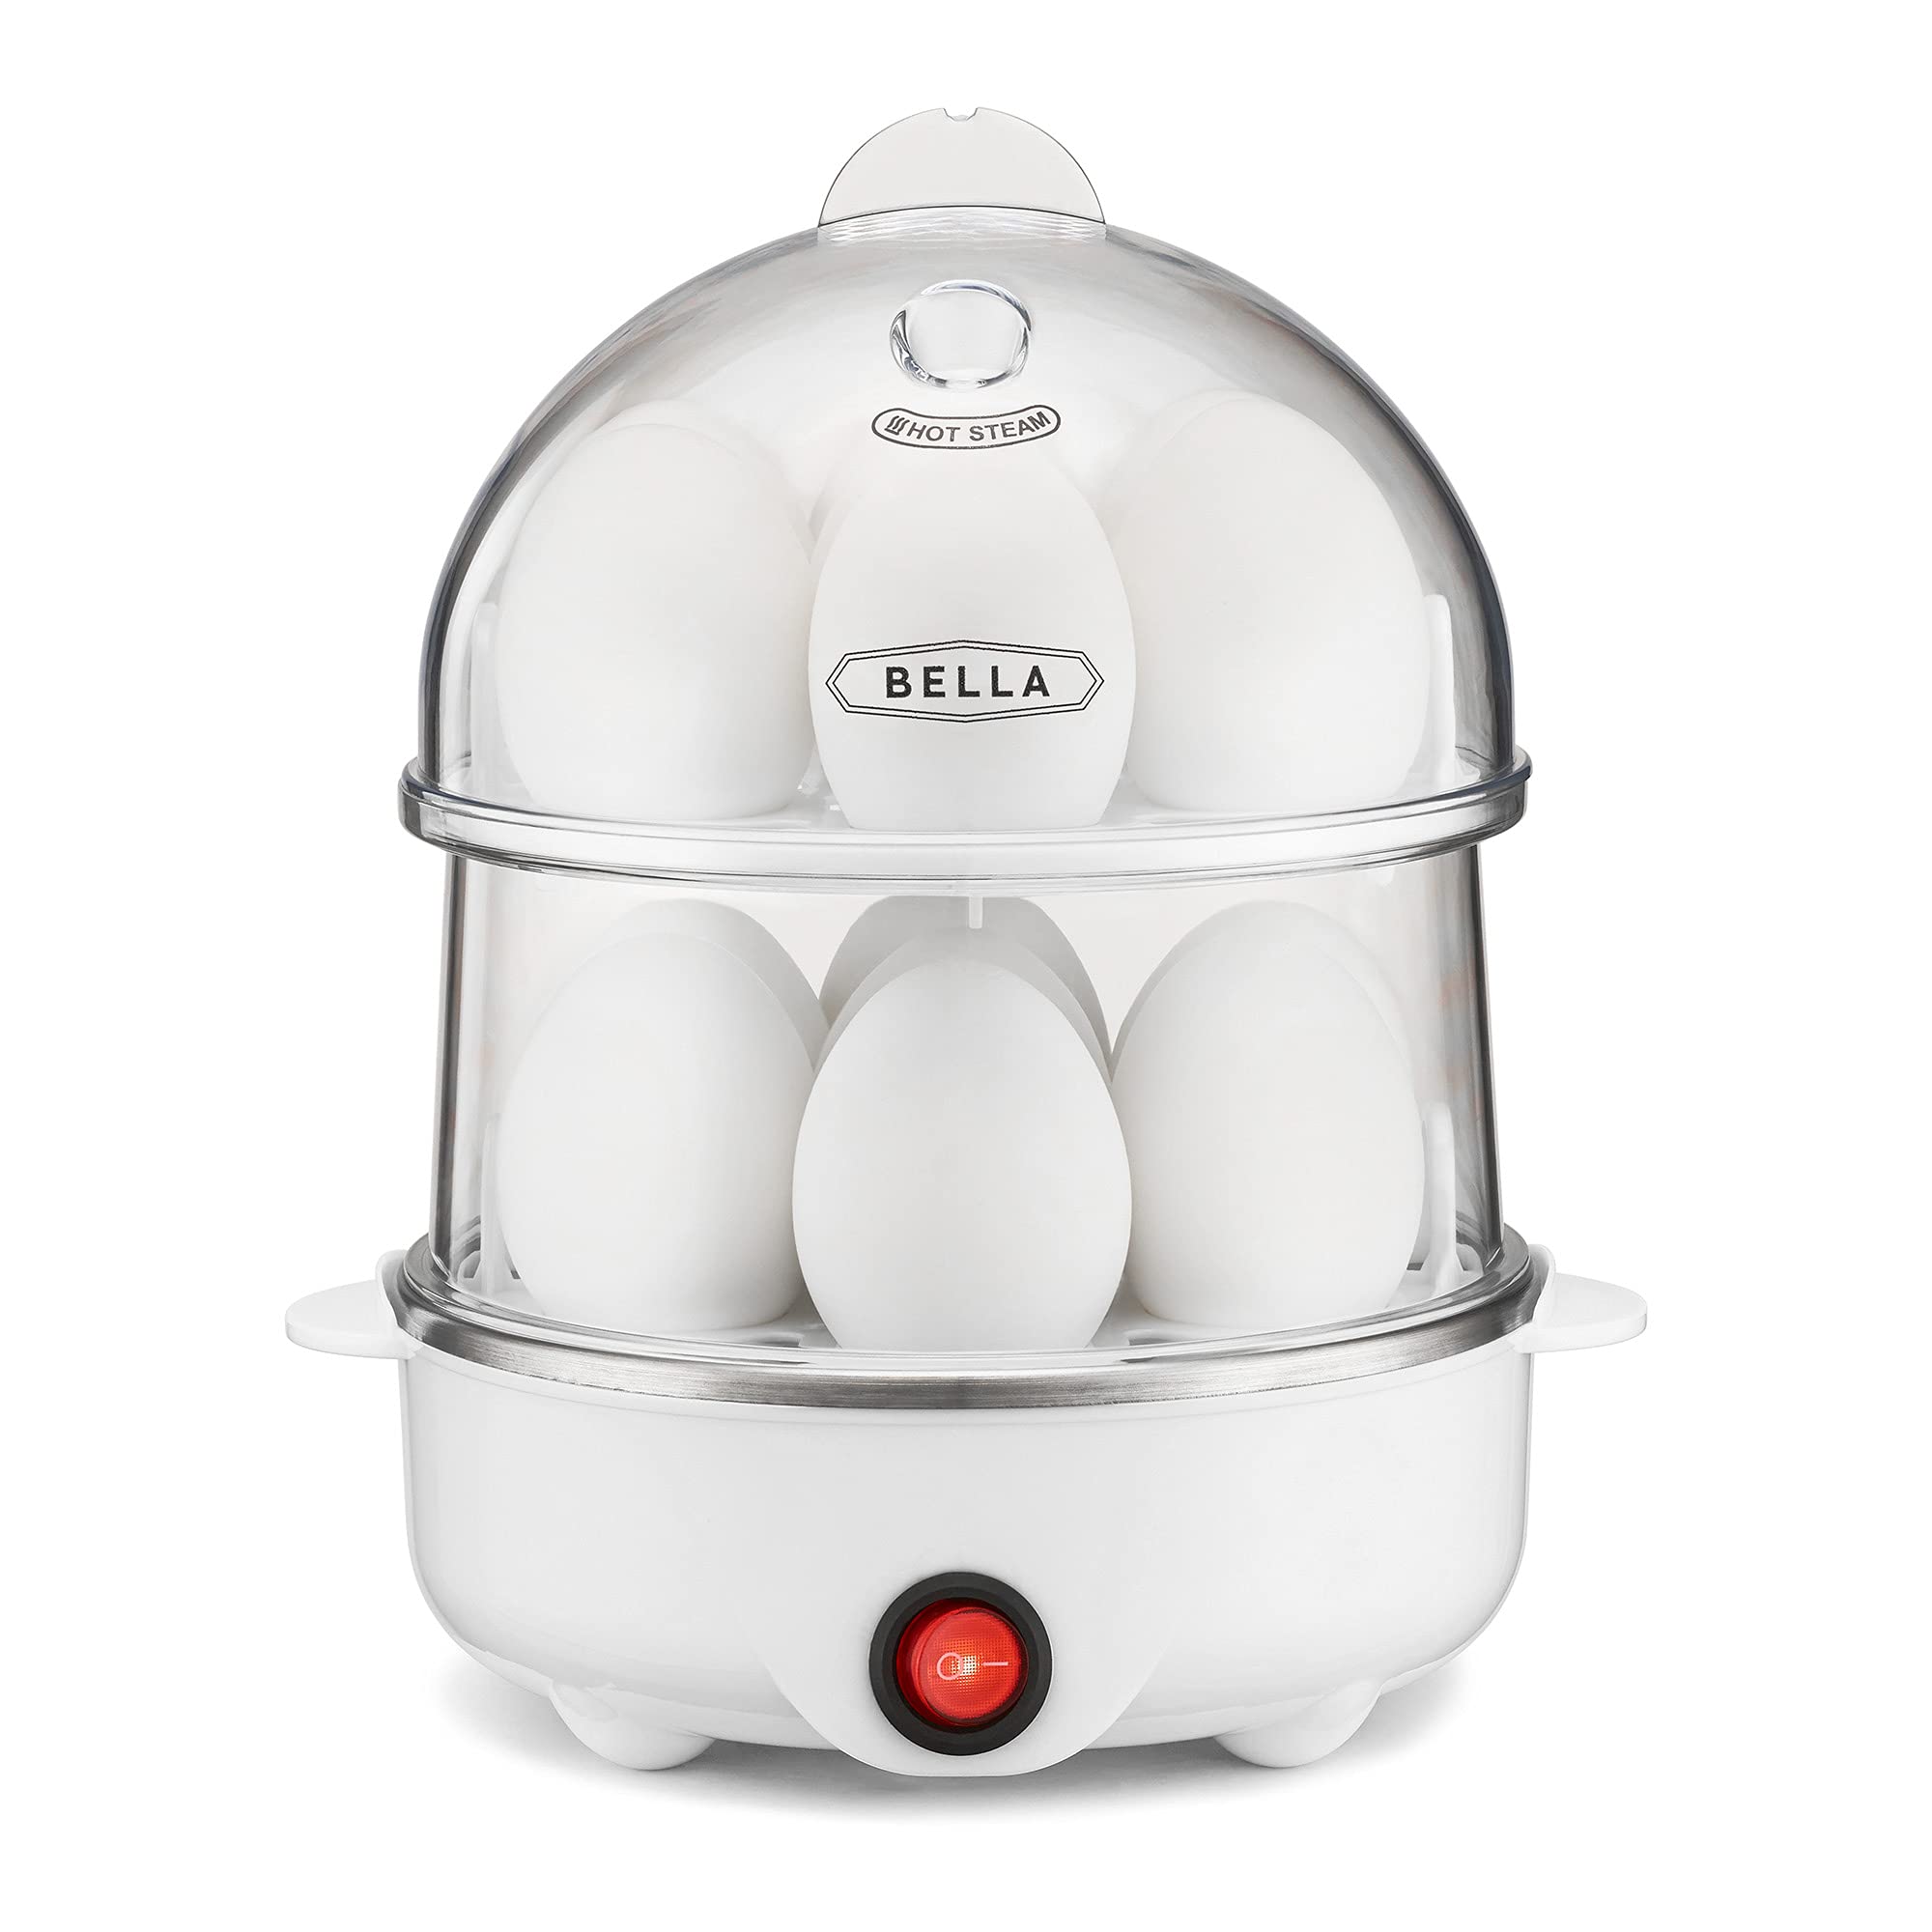 Bella Rapid Electric Egg Cooker & Poacher (14 Egg Capacity, White) $12.26 + Free Shipping w/ Prime or on $35+